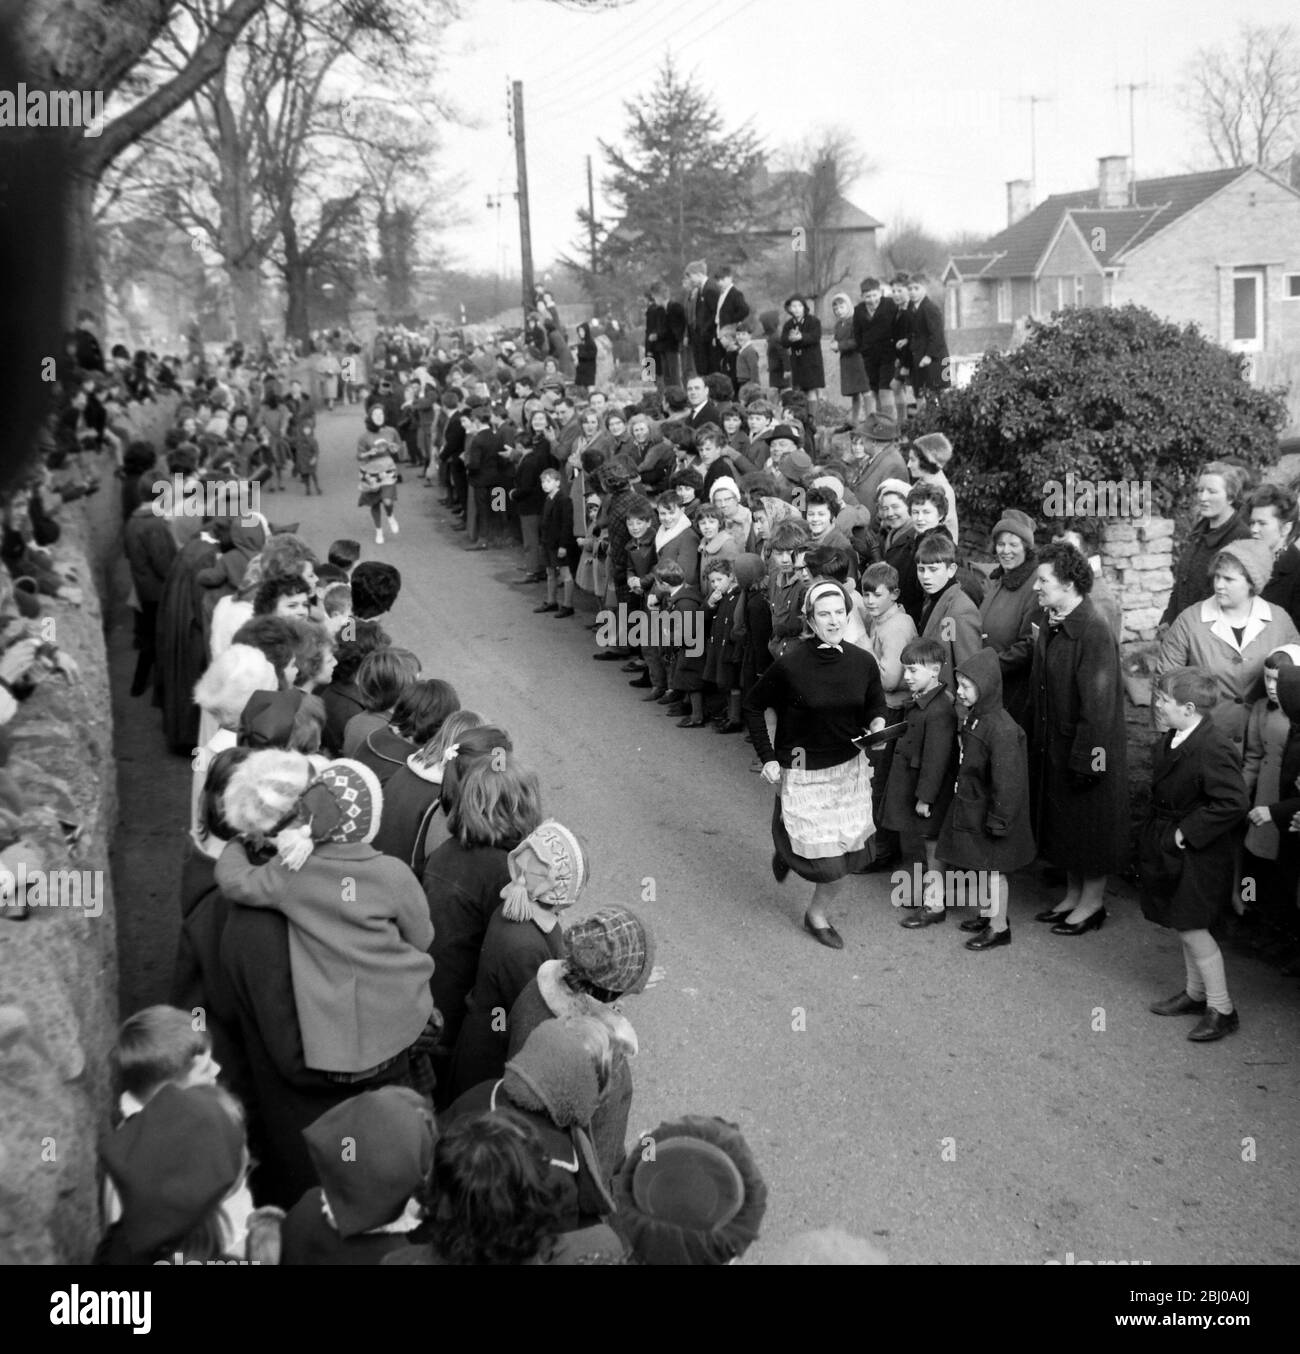 11 FEBRUARY 1964 - BRIDGET LOWRIE - 29 YEAR OLD MOTHER OF TWO IS THE WINNER OF THE OLNEY PANCAKE RACE AFTER COMPLETING THE 415 YARD COURSE IN 1 MINUTE 6.4 SECONDS. THE RACE DATES BACK TO 1445 AND WAS REVIVED BY THE LOCAL VICAR IN 1946. - OLNEY, BUCKINGHAMSHIRE, ENGLAND Stock Photo